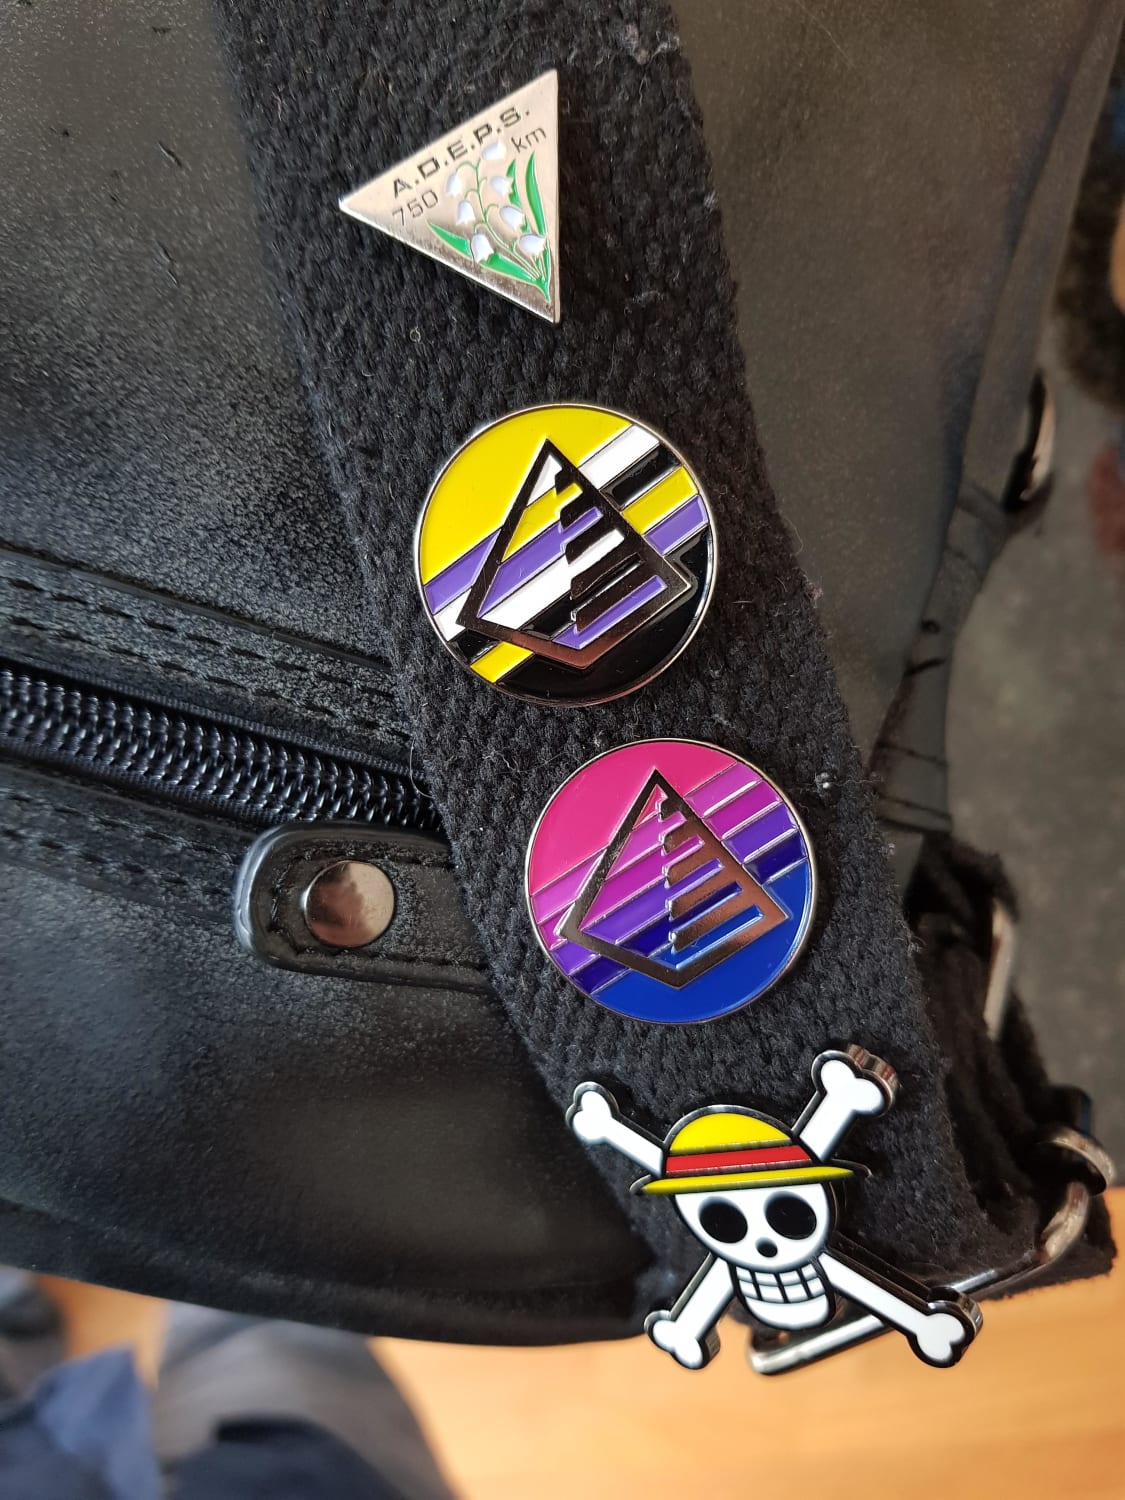 Bi and Enby pride pins I designed and got made. The prism with six stripes symbolizes the rainbow flag.